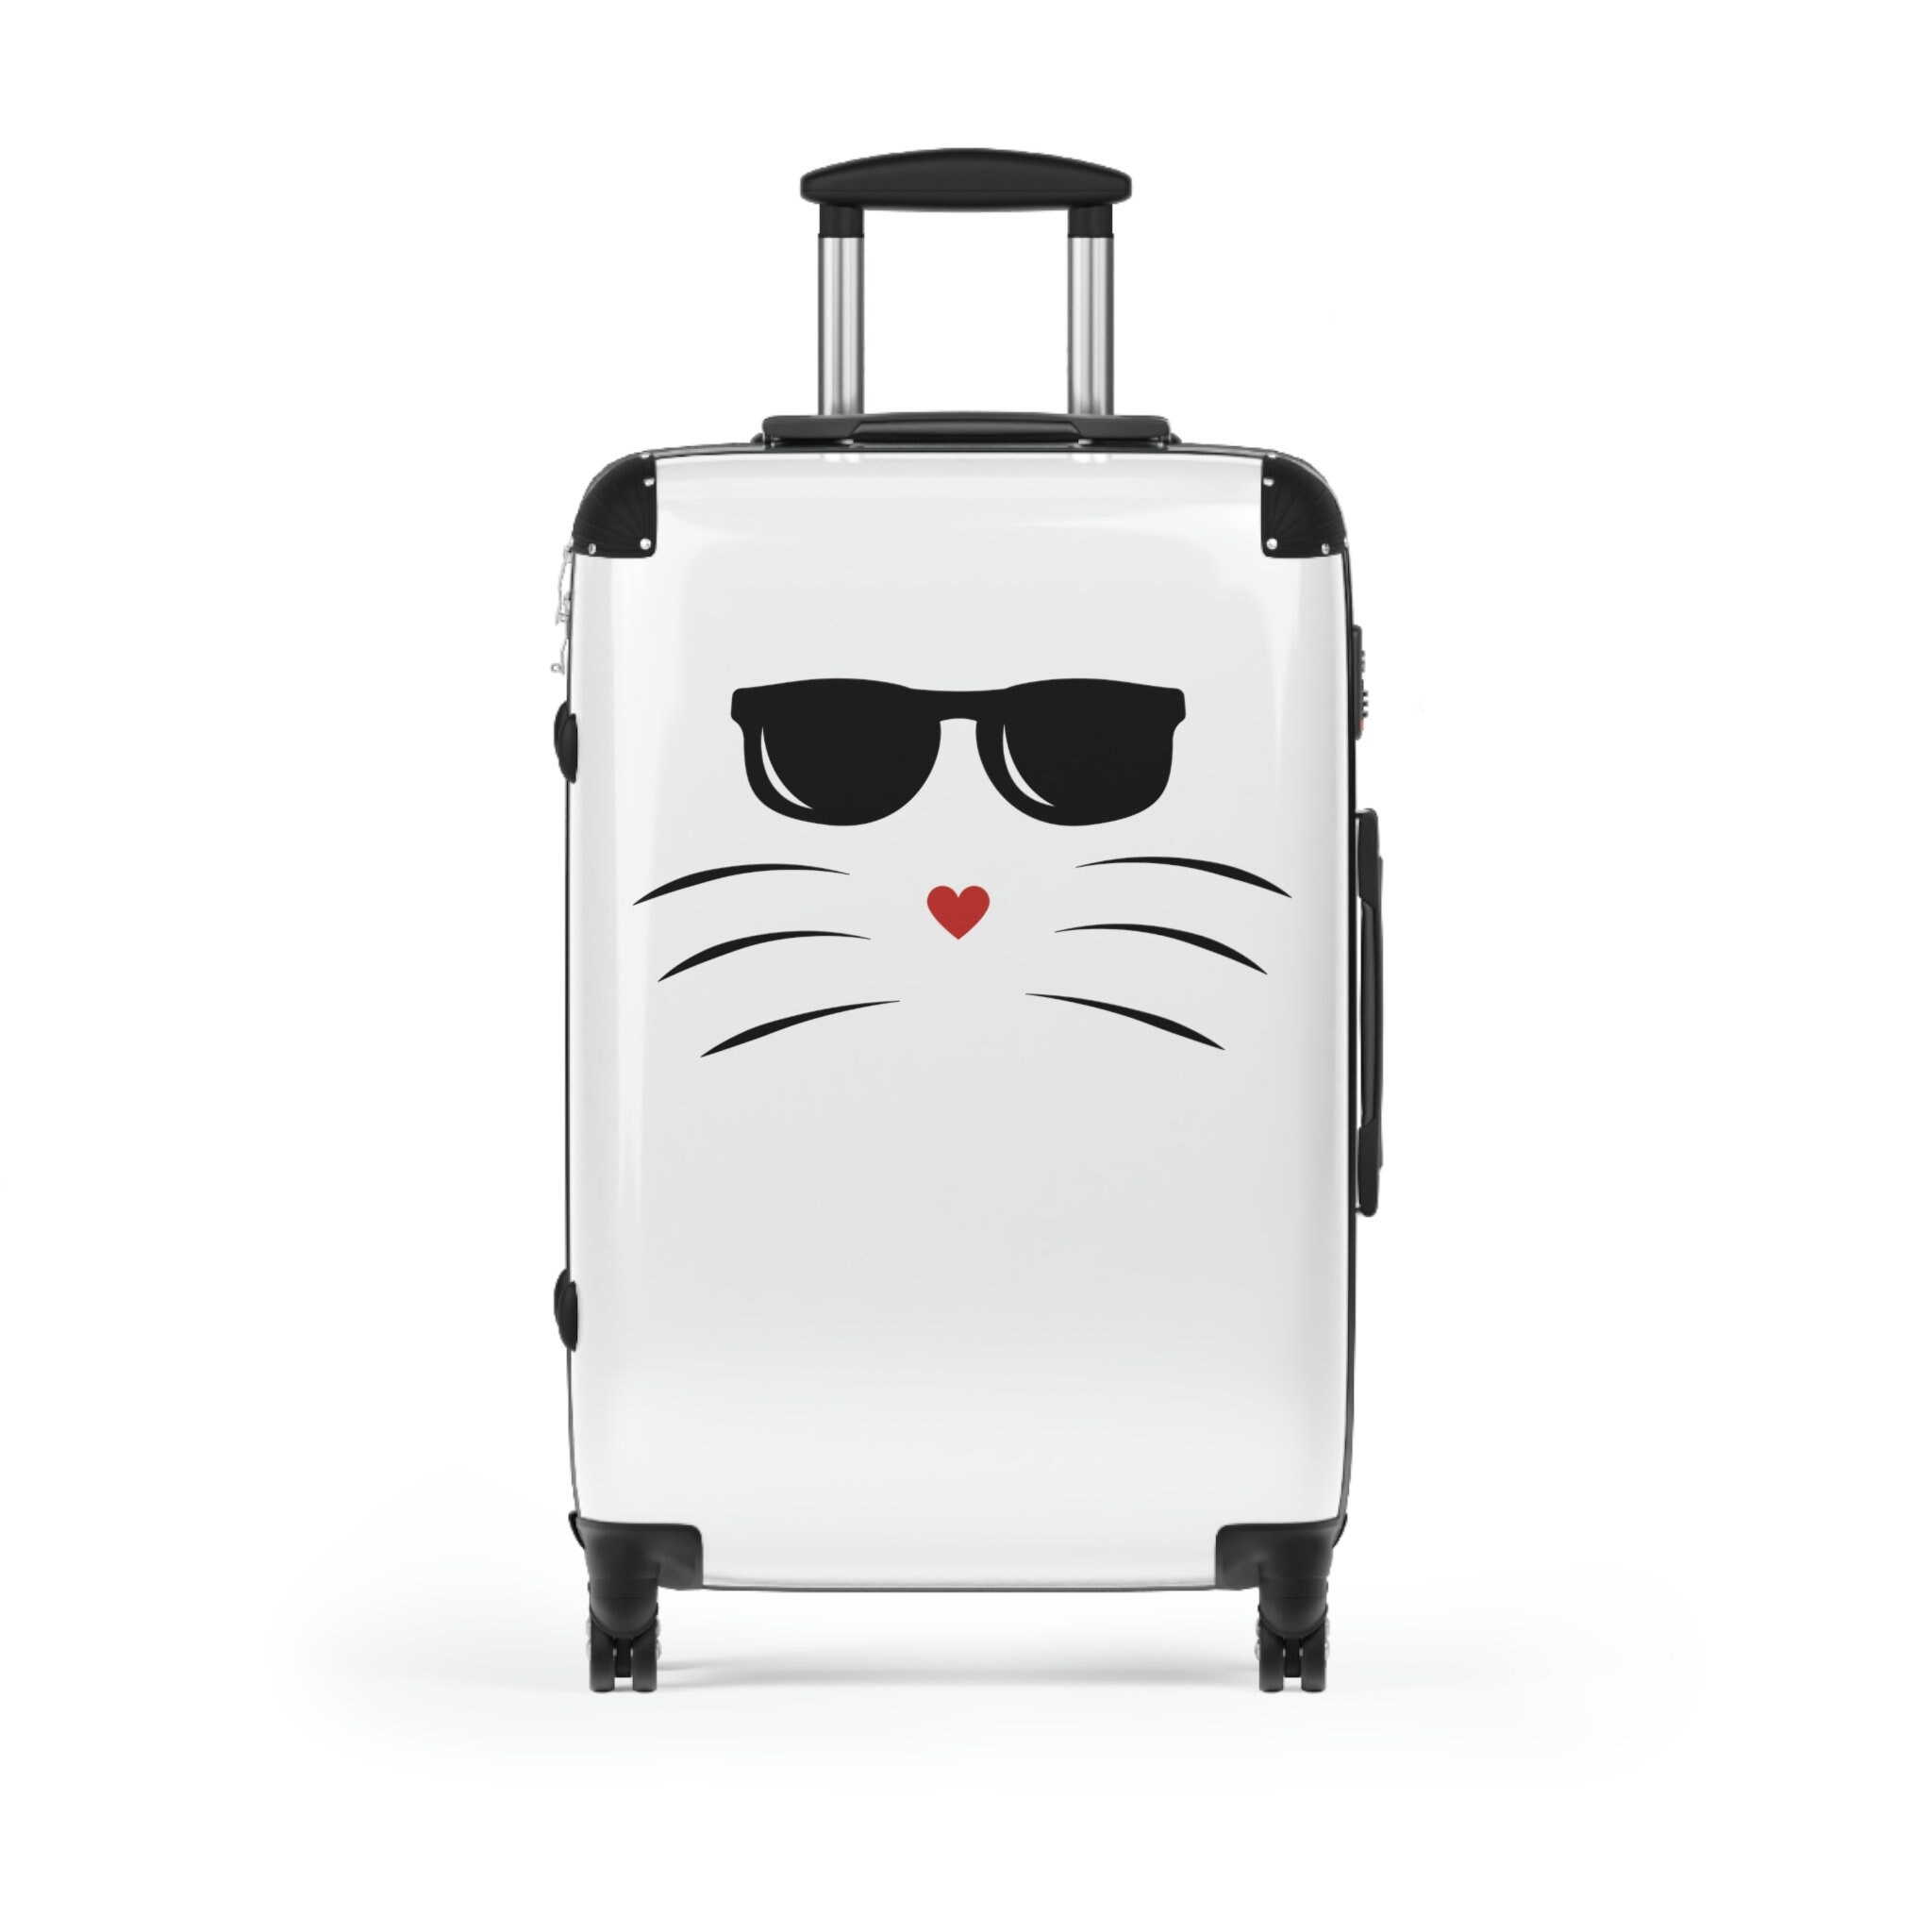 Cat Luggage Spinner Wheels, Kitty Meow, Hard Shell Suitcase 1, 2 or 3 pieces, Girl Woman Weekend Cabin Bag, Carry-On, Kids Luggage